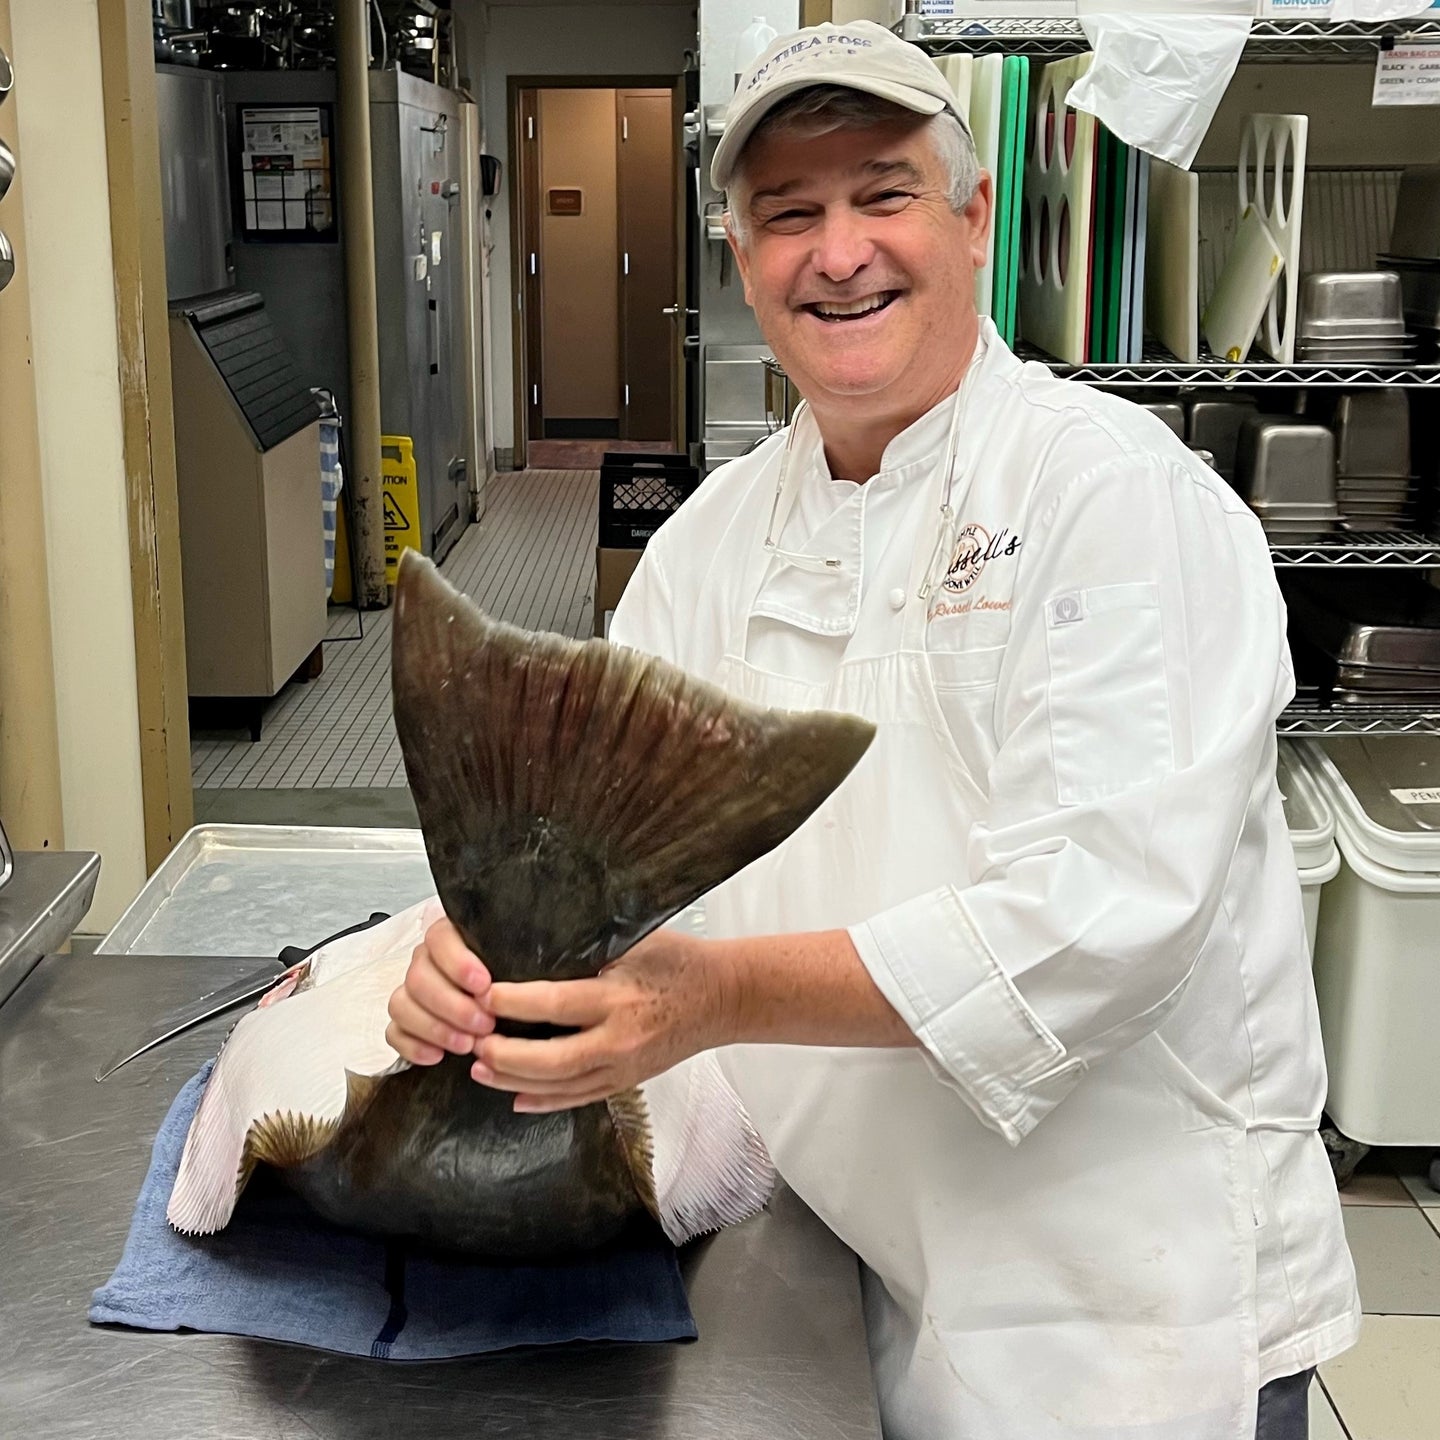 Celebrating Wild Halibut - An Interview with Chef Russell Lowell